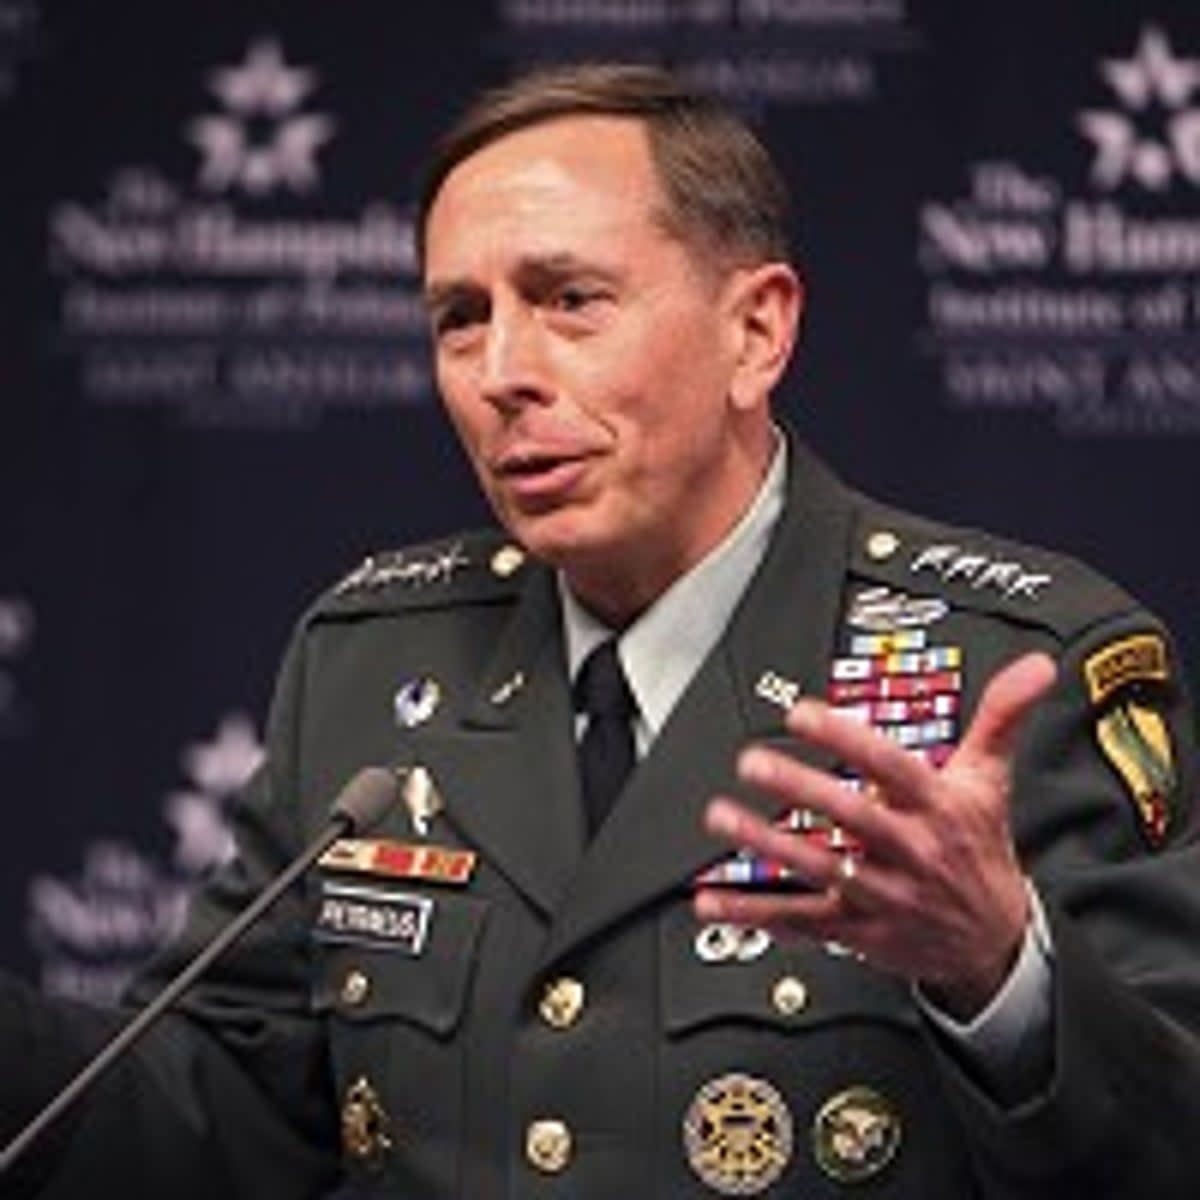 General Petraeus led the CIA after heading up US-led forces in both Afghanistan and Iraq